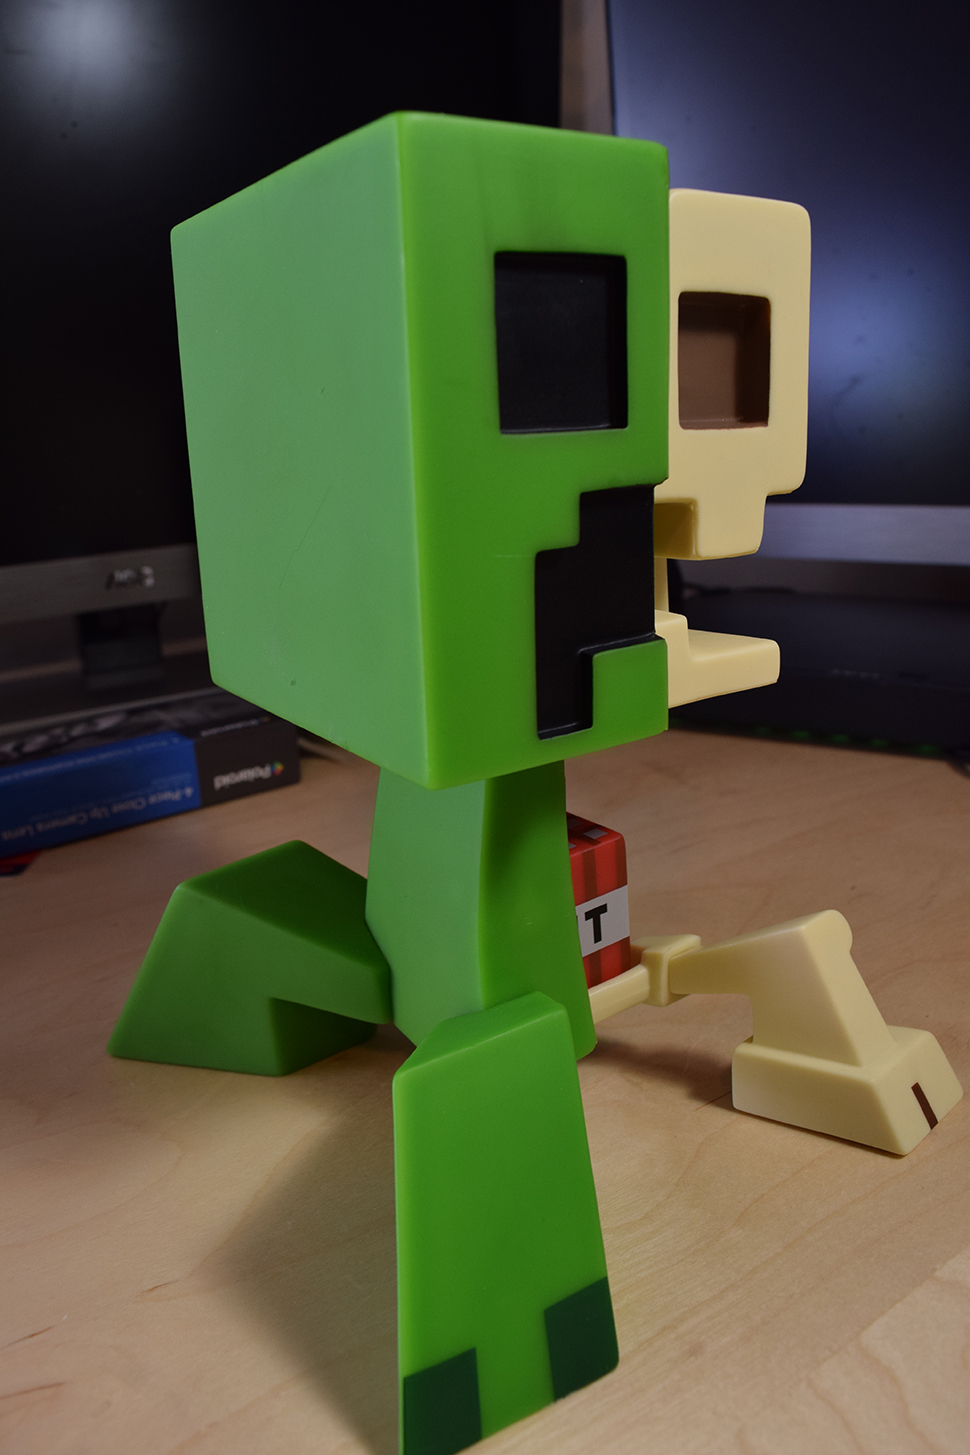 The Minecraft Creeper Anatomy Doll Answers So Many Questions